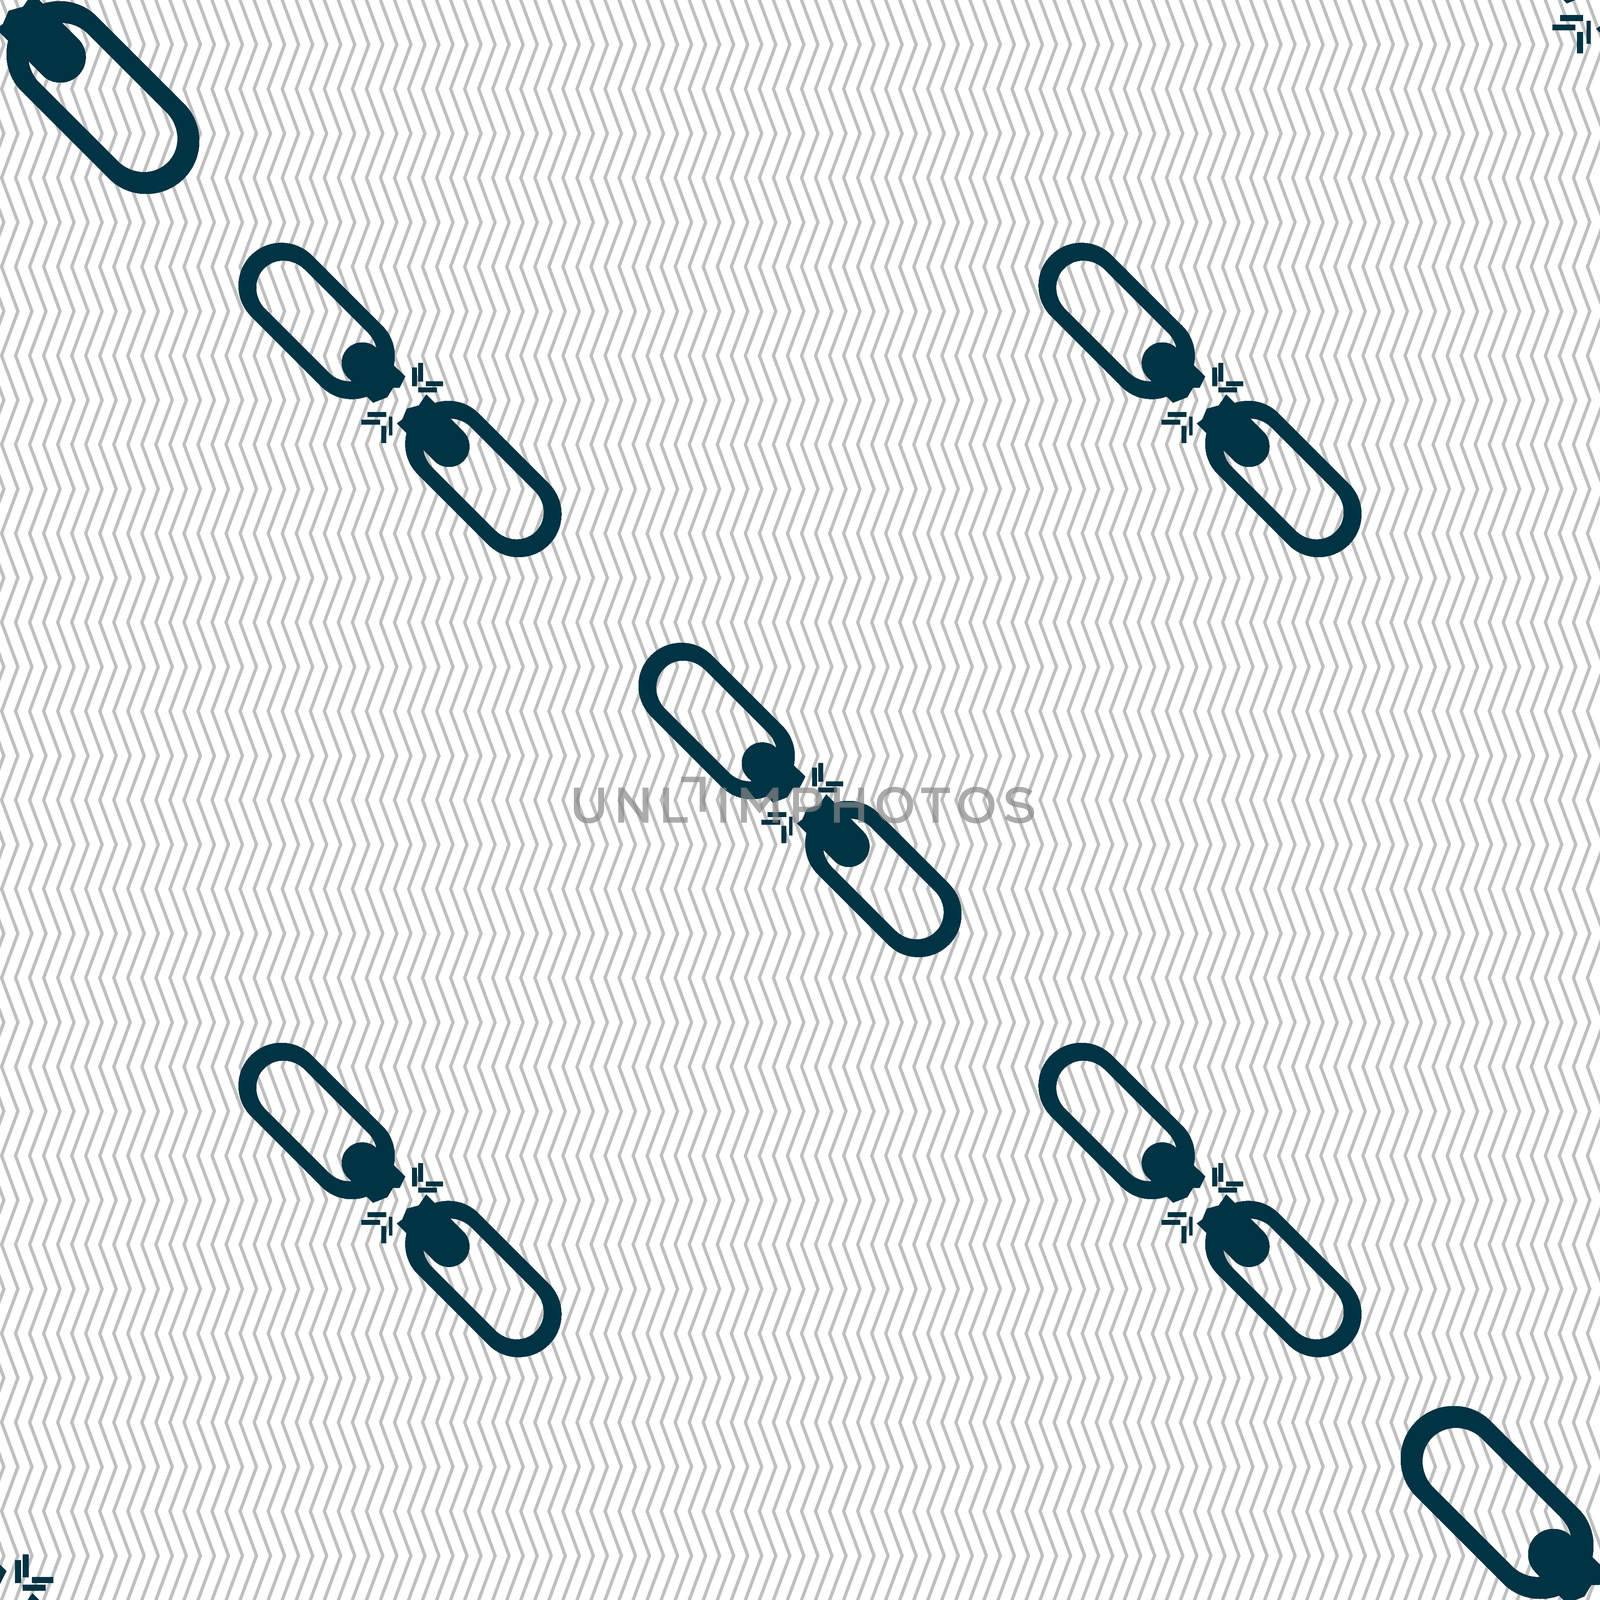 Broken connection flat single icon. Seamless abstract background with geometric shapes. illustration